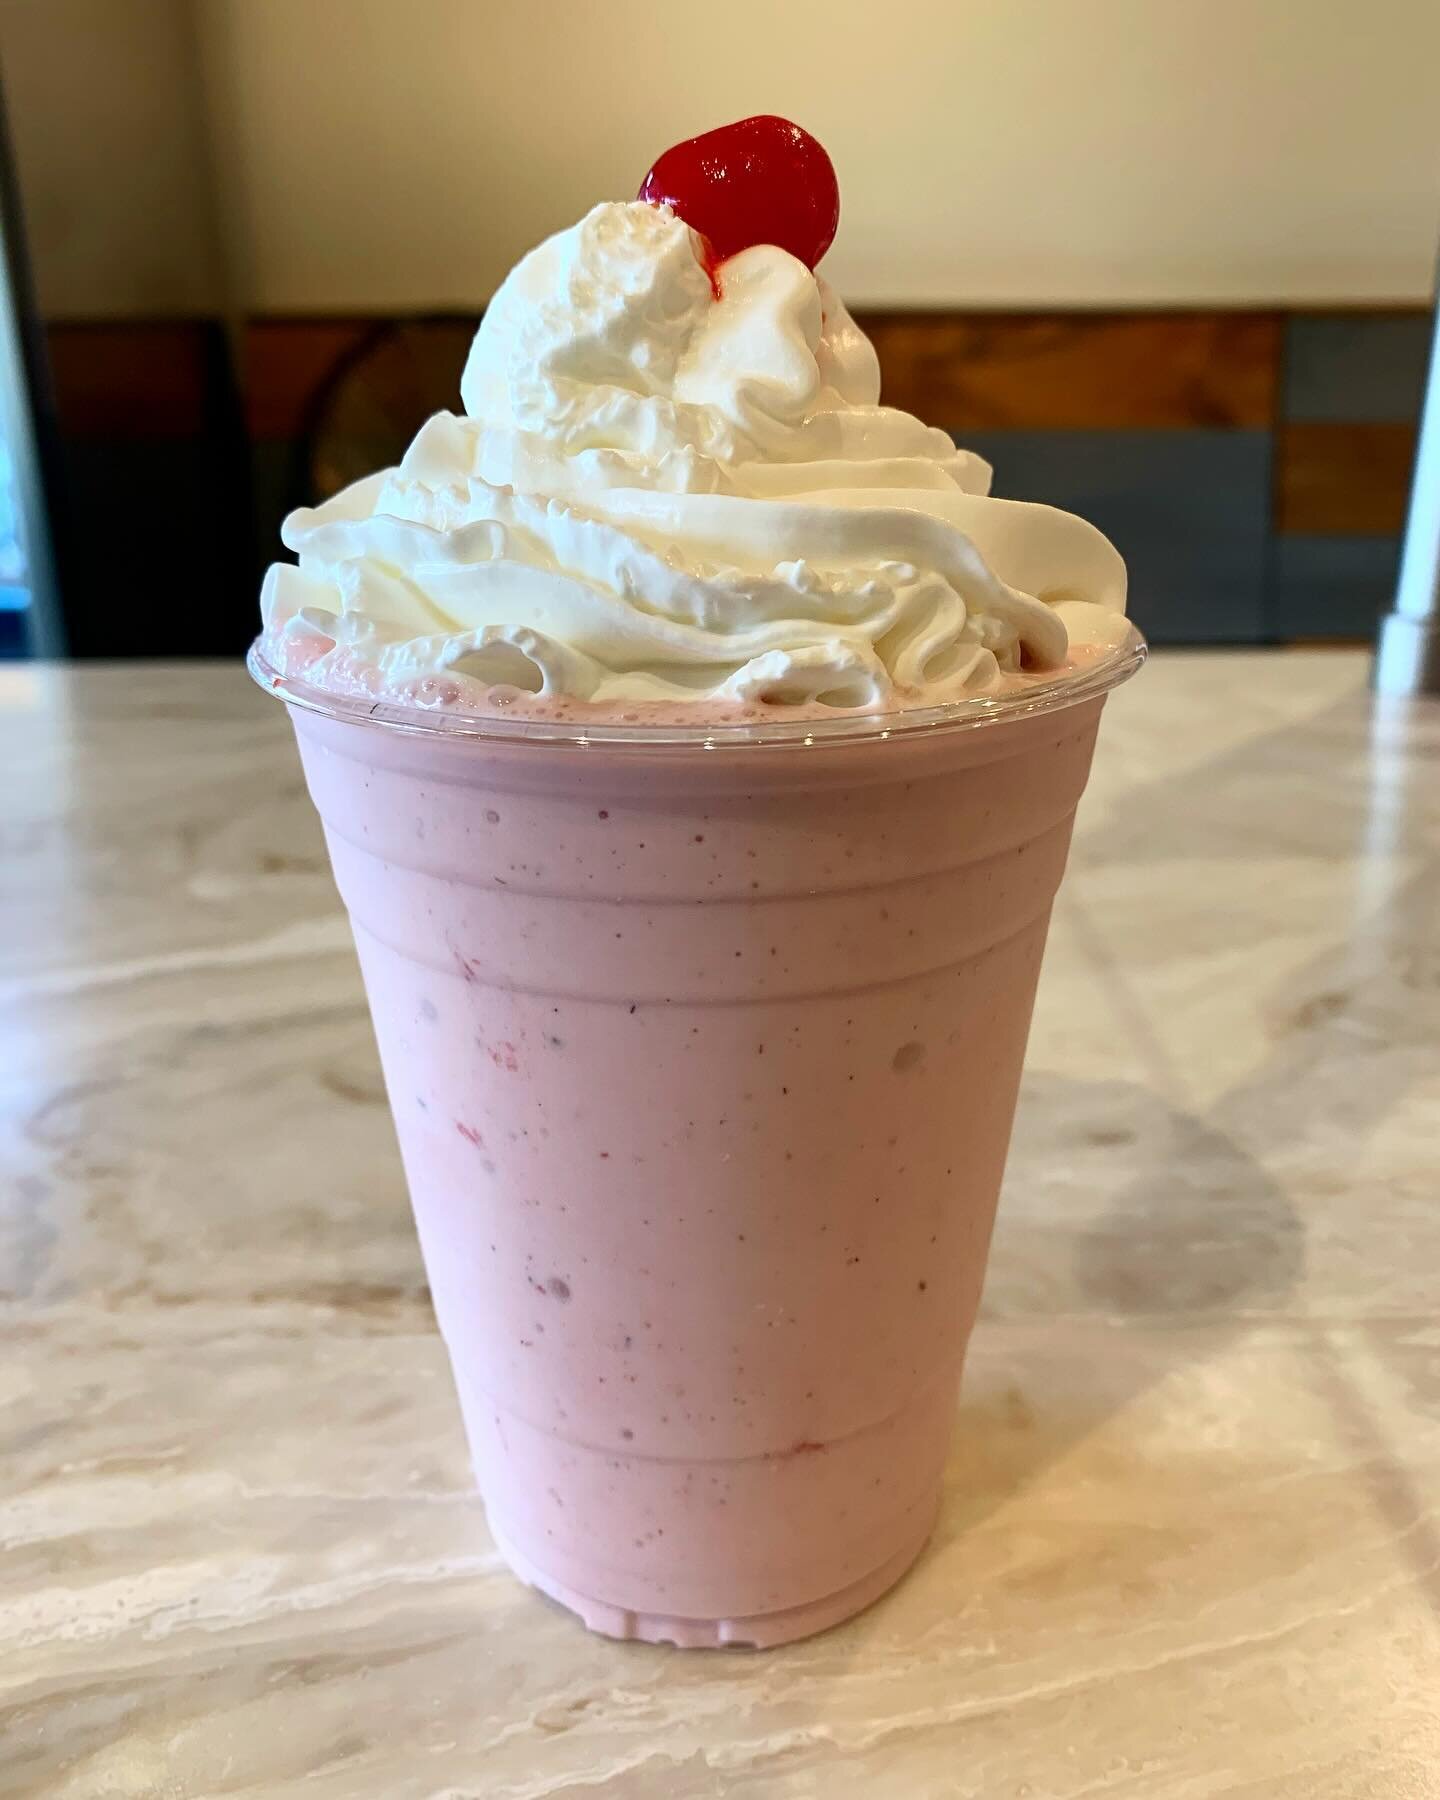 Who&rsquo;s on their last day of spring break?? Ready to head back to school tomorrow? Neither are we! But we&rsquo;re gonna end it right with a creamy MILKSHAKE!
⠀⠀⠀⠀⠀⠀⠀⠀⠀⠀⠀⠀⠀⠀⠀⠀⠀⠀
Come on by!
🌷Sun: Noon-9pm
🌷Mon-Thur: 1pm-9pm
🌷Fri: 1pm-10pm
🌷Sa